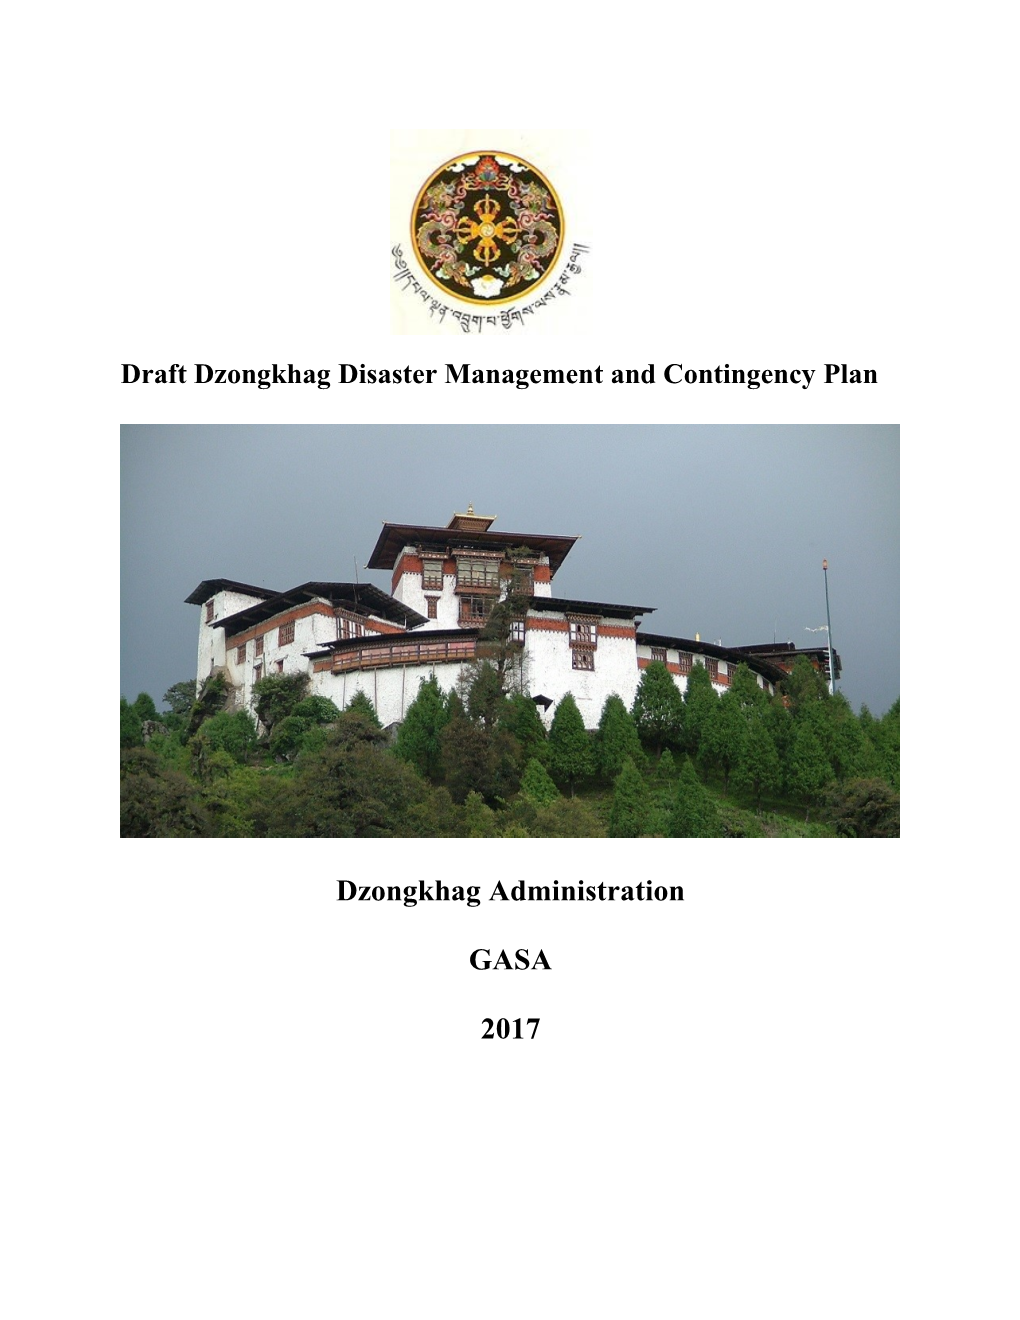 Gasa Dzongkhag Disaster Management Plan Presents Hazard, Vulnerability and Capacity Profile for the Four Gewogs